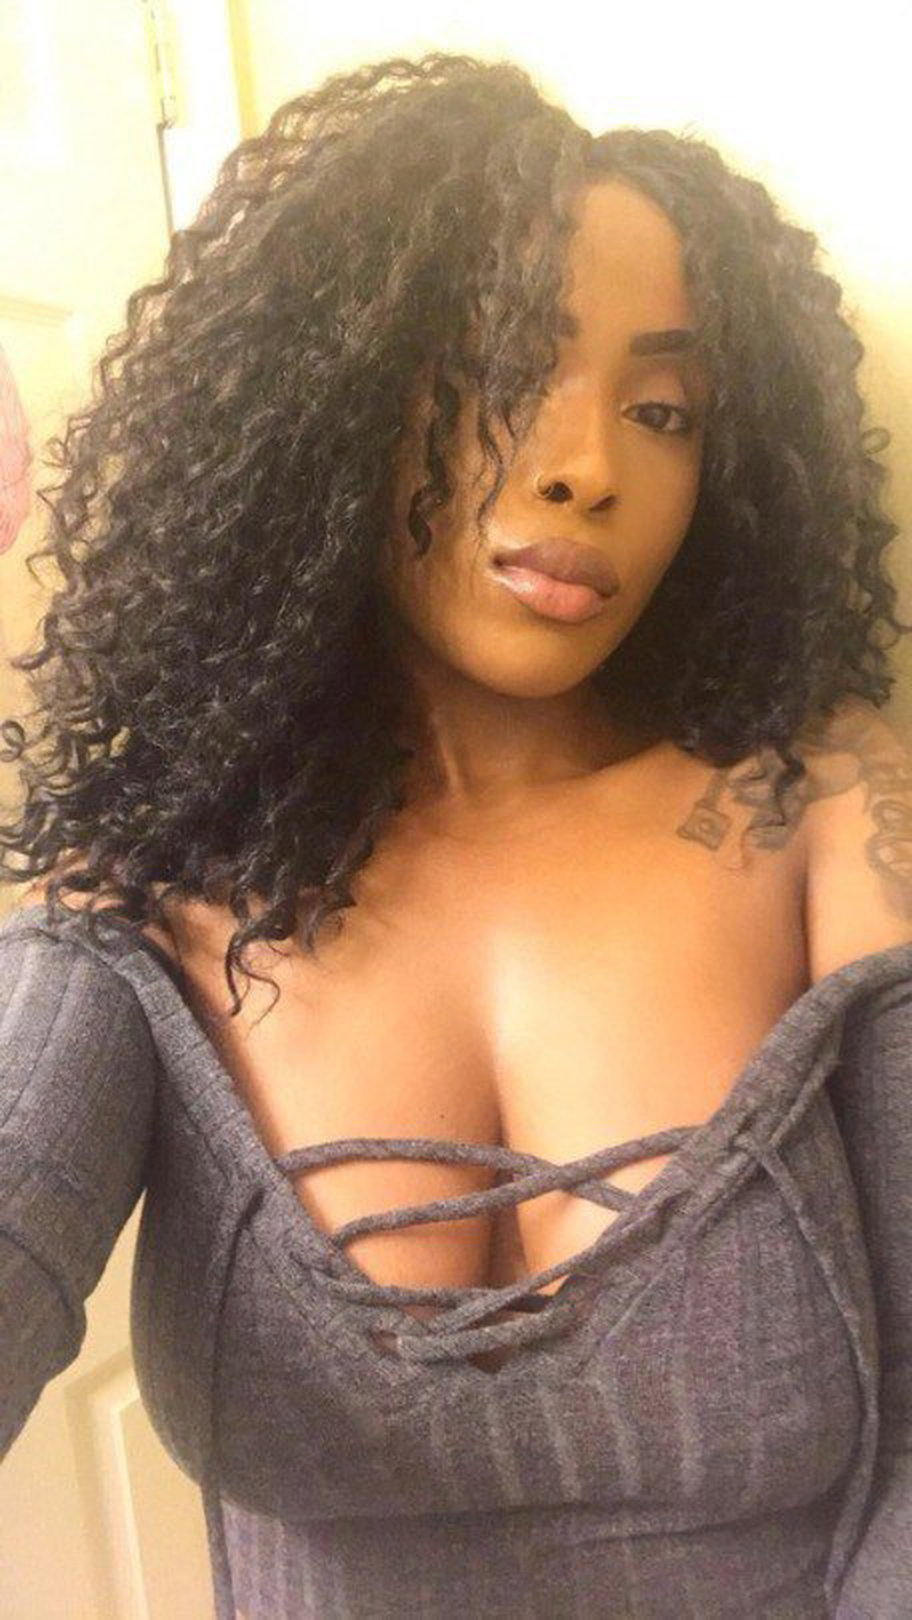 Photo by Ruinedcarpet with the username @Ruinedcarpet,  April 1, 2021 at 7:18 PM. The post is about the topic Ebony and the text says '#Hot #BlackWoman #Busty #DarkHair #Makeup #Tattoo #Piercing #Ebony #Possing #Beauty #Brunette #CurlyHair #DarkHaired #Natural #BigTits #CurlyHaired #AmateurSelfie'